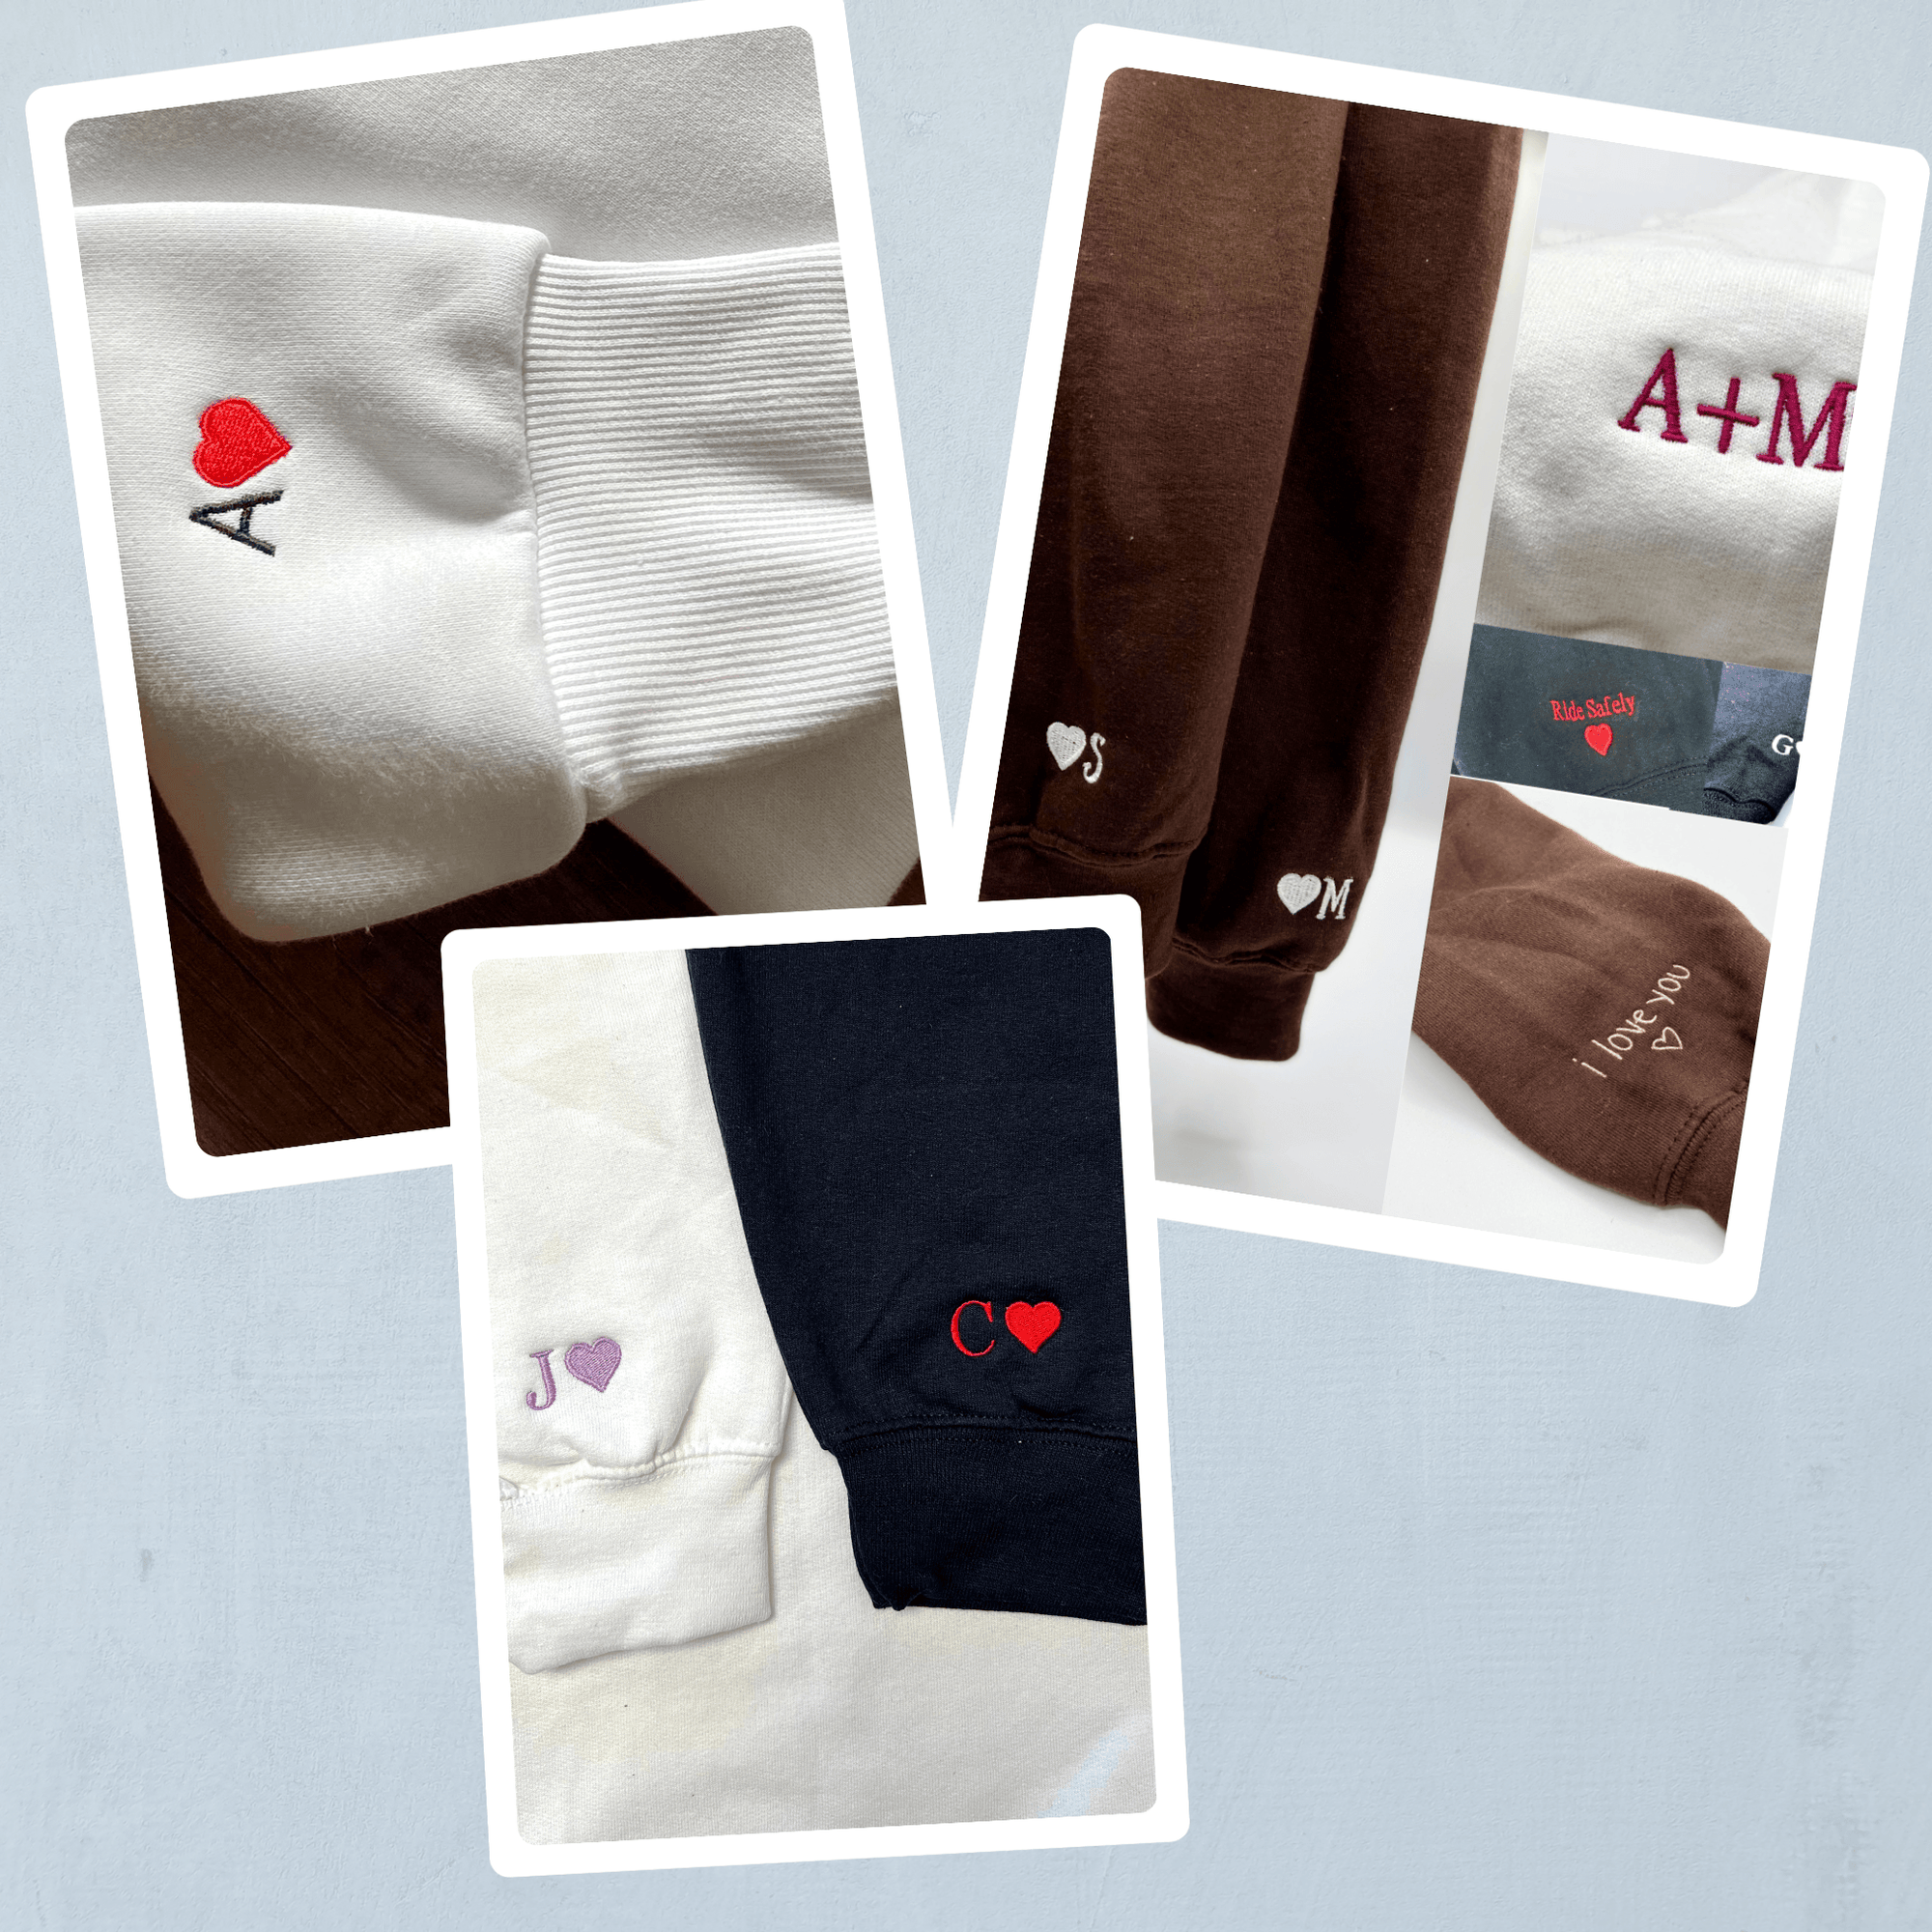 Custom Embroidered Hoodies For Couples, Custom Matching Couple Hoodie, Cartoon Spider and Kitten Couples Embroidered Hoodie V1